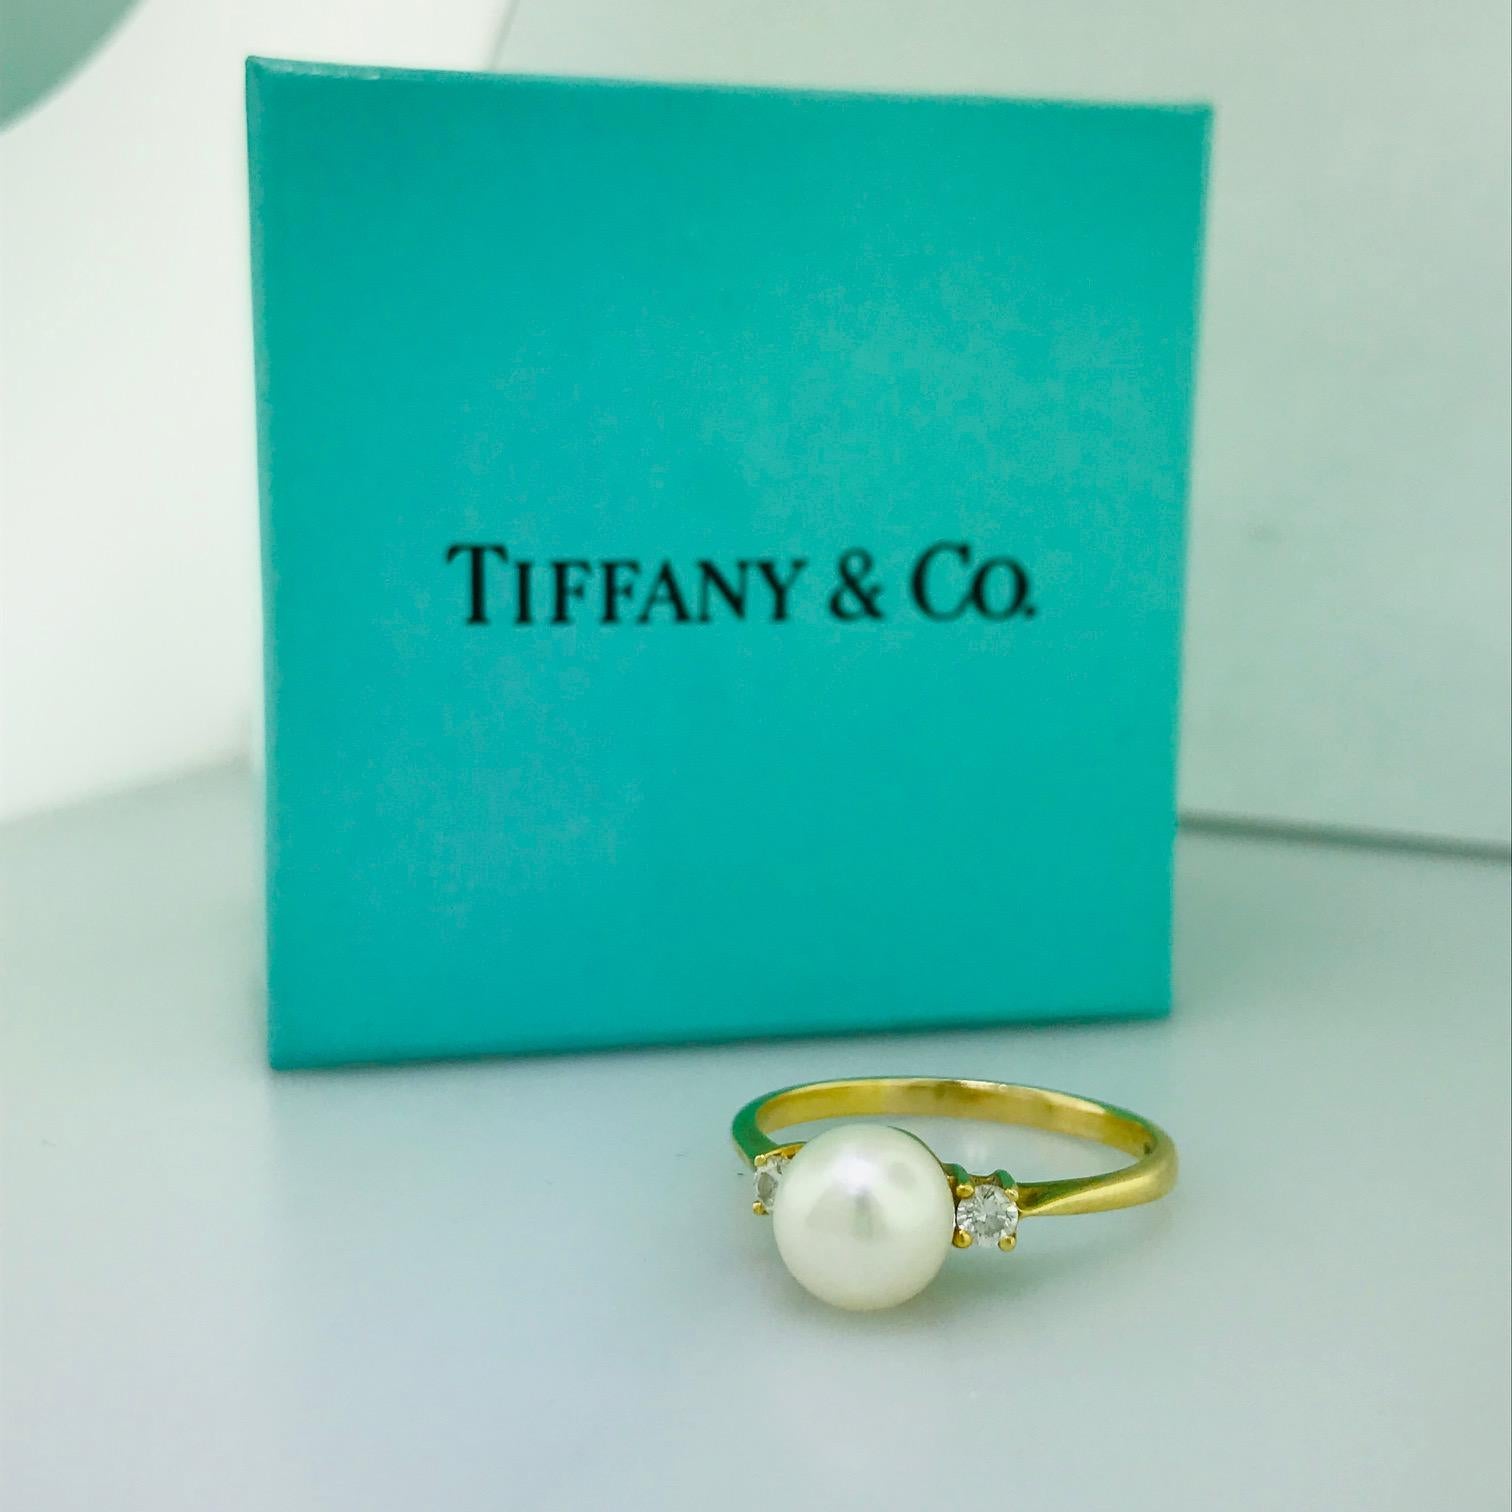 This Tiffany & Company pearl and diamond ring is an original Tiffany & Co. piece. The 18 karat yellow gold ring has one round Akoya pearl in the center with two round brilliant diamonds on either sides. The side diamonds are .10 carat total diamond